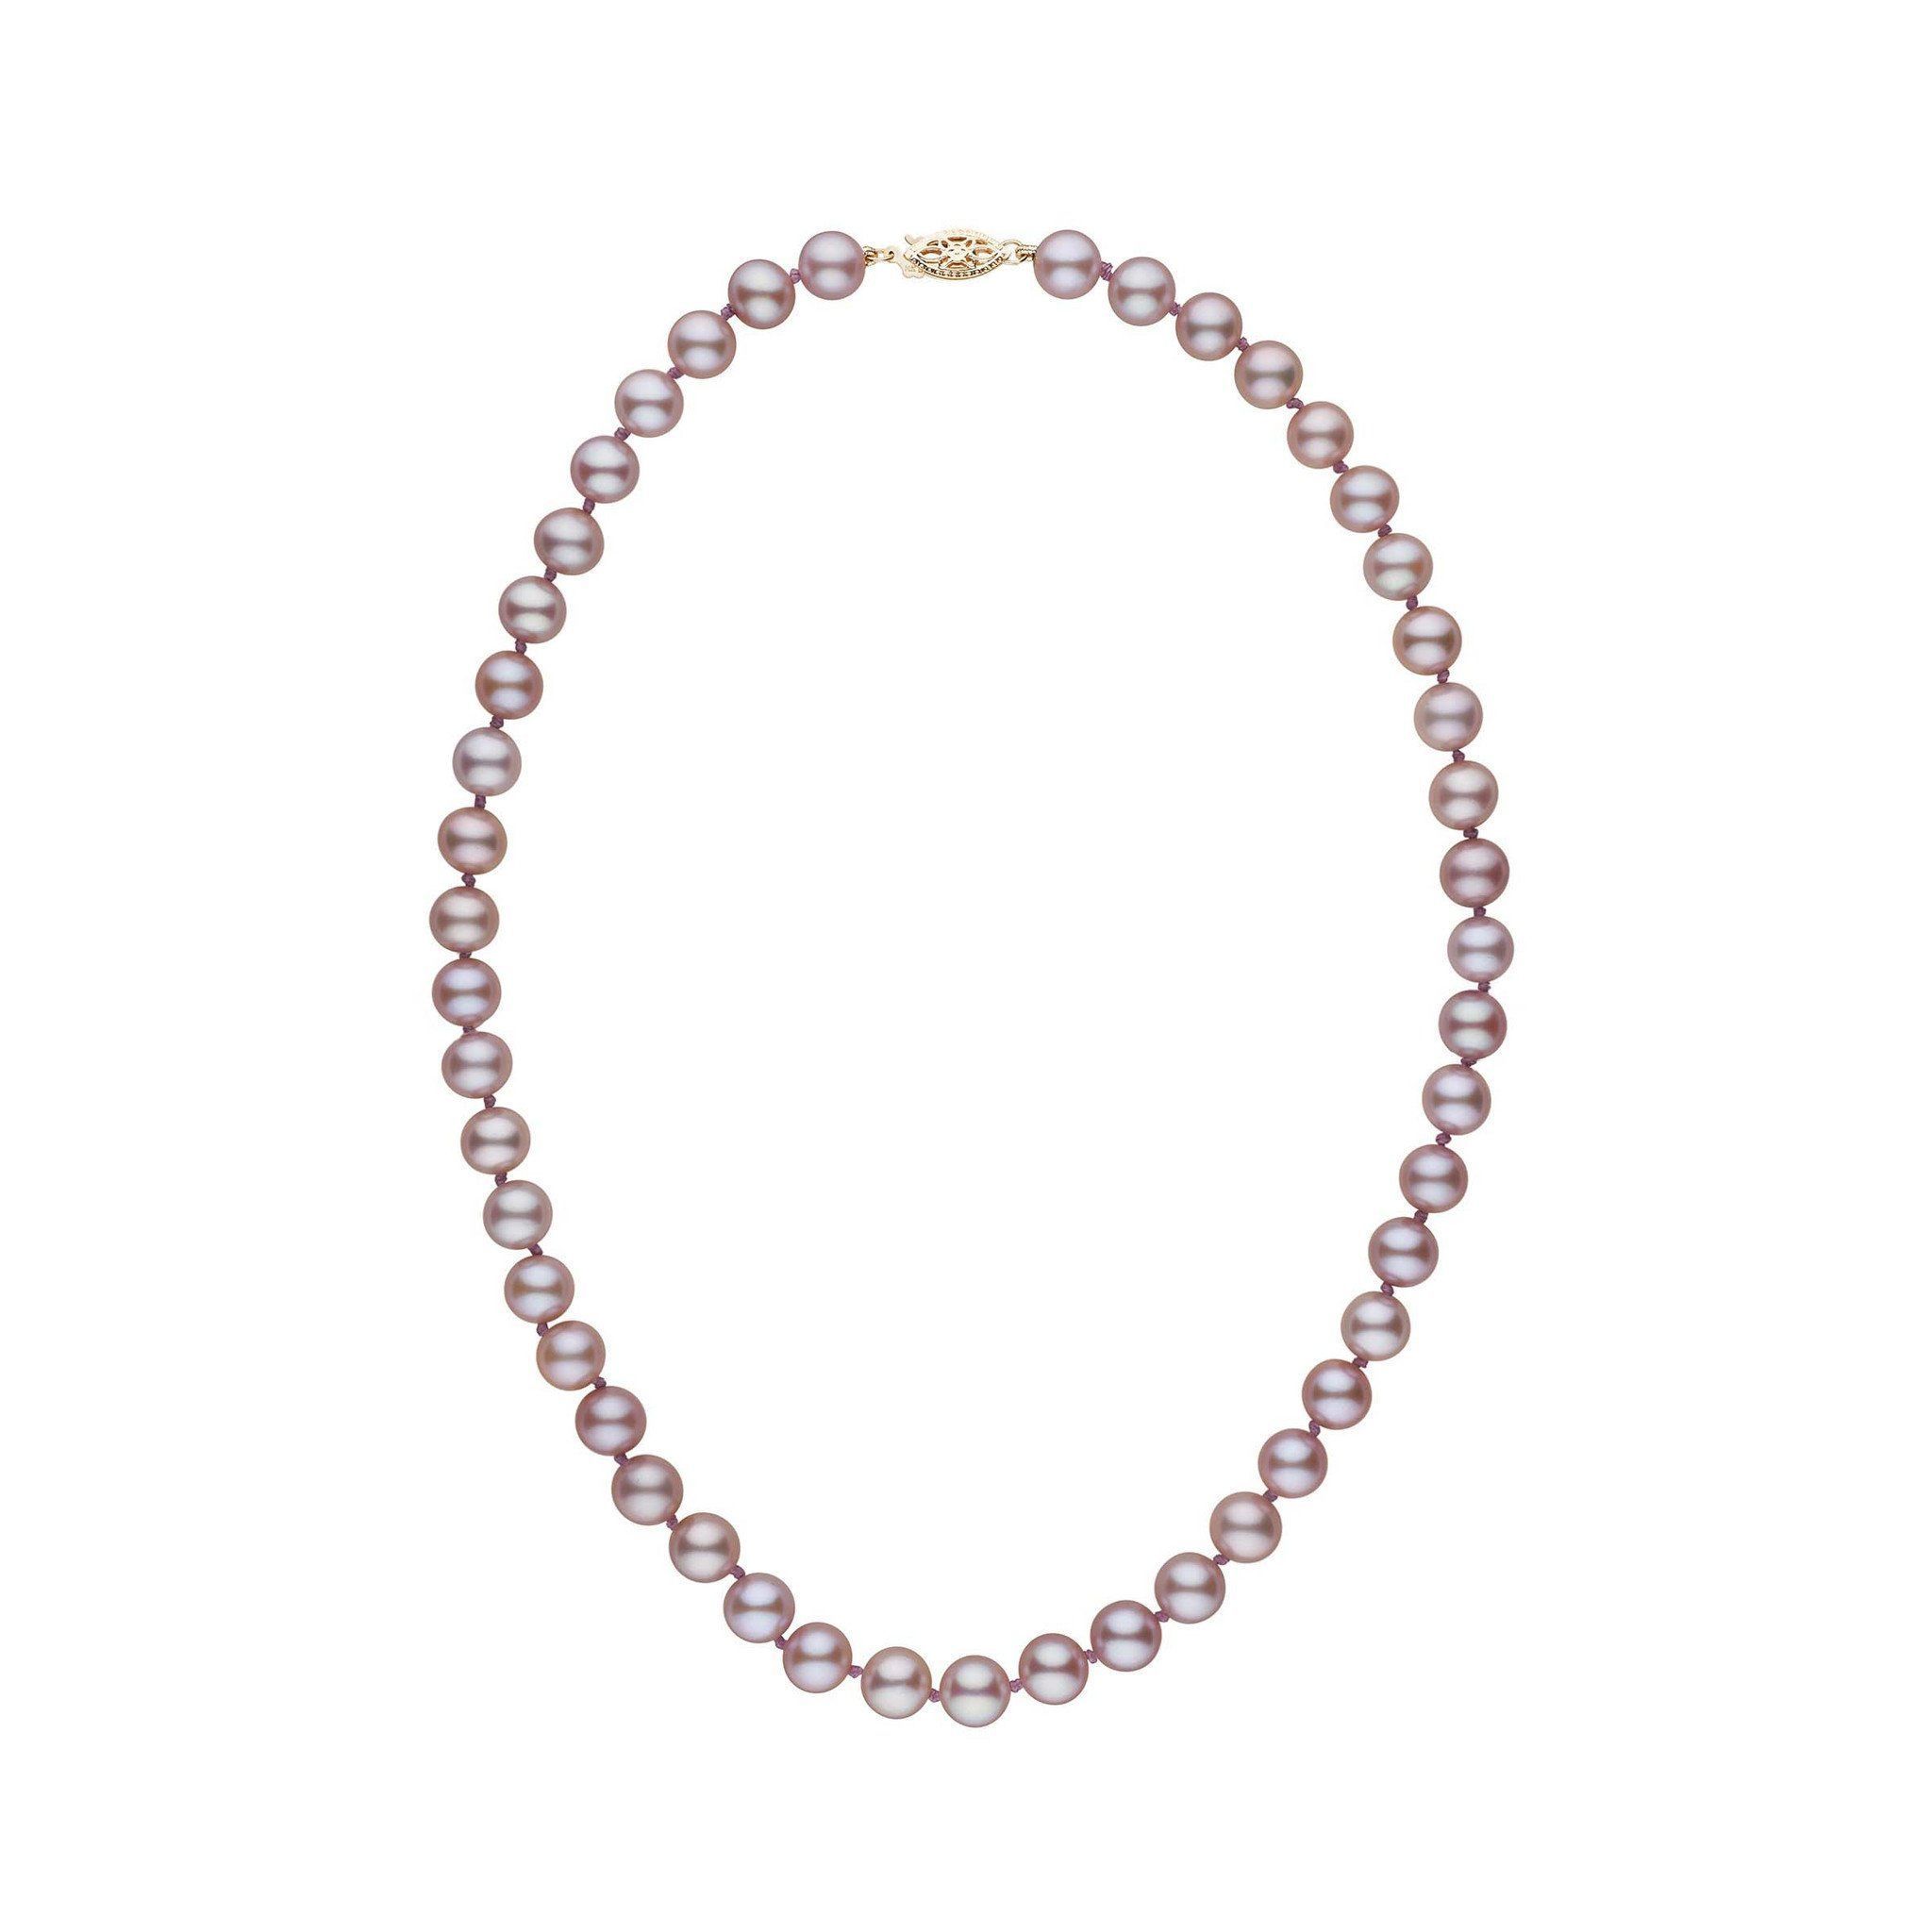 7.5-8.0 mm 16 inch AAA Lavender Freshwater Pearl Necklace